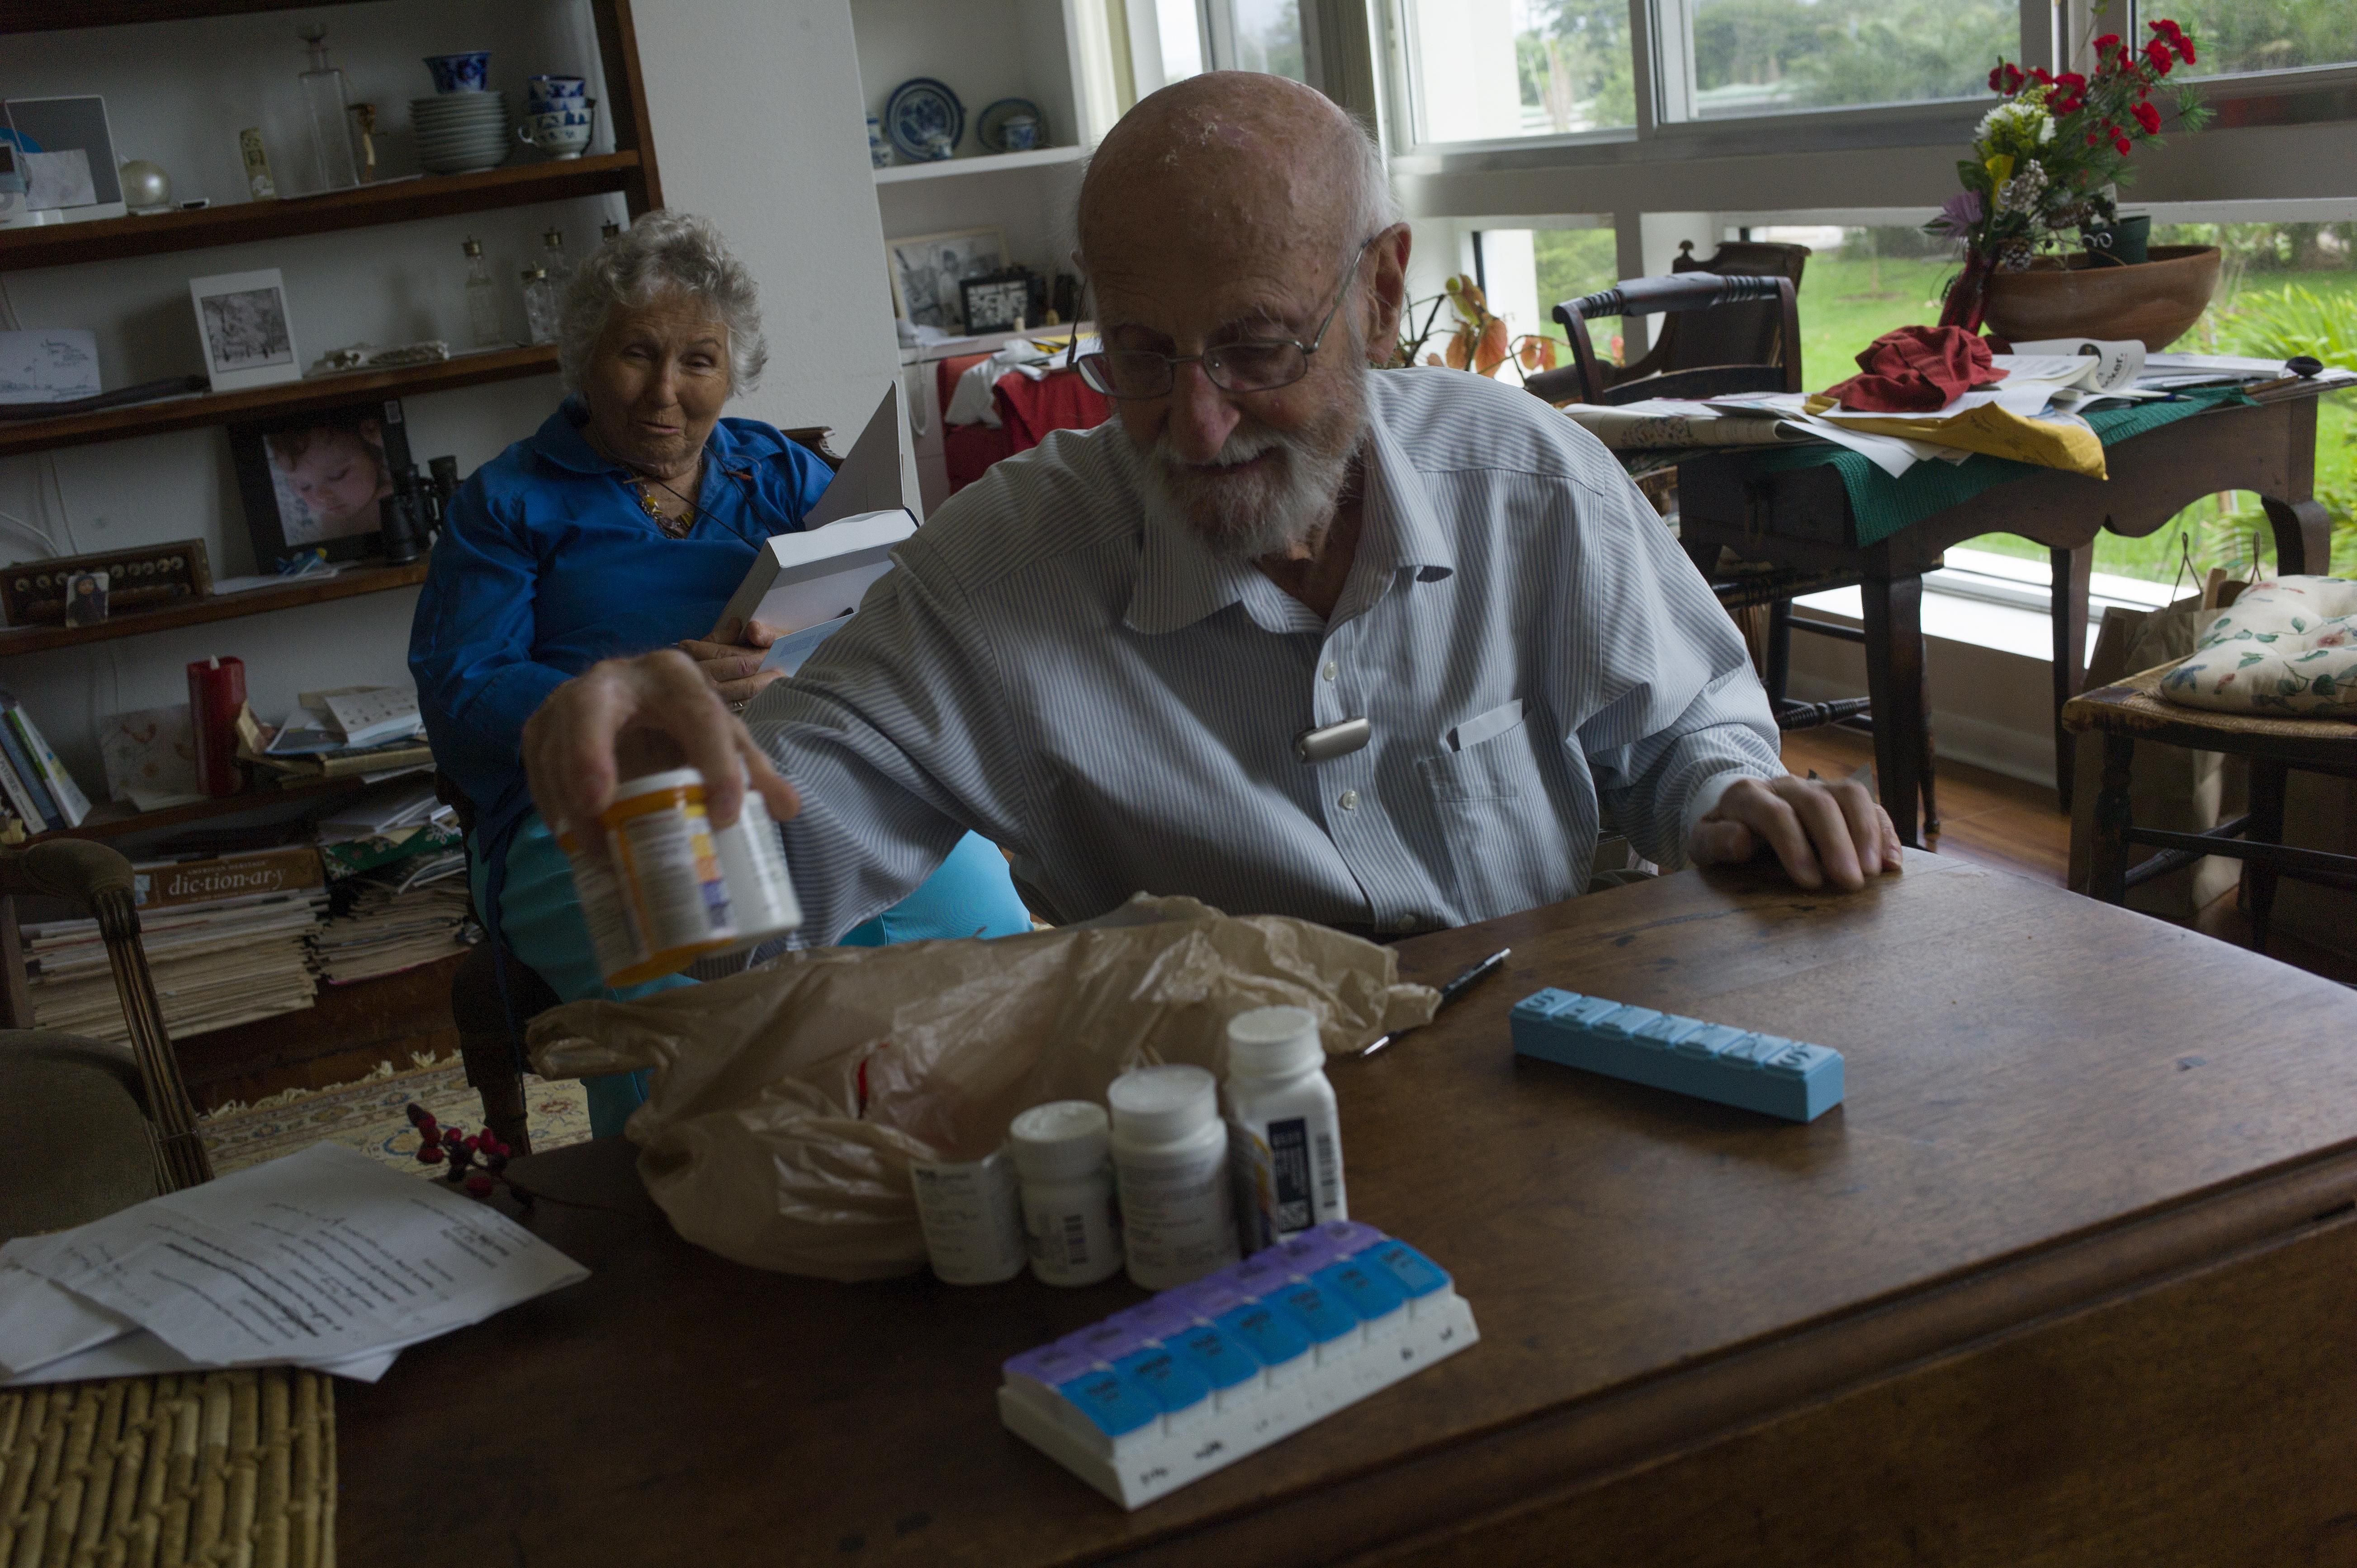 Charles Miller, 90, prepares the daily pills his wife will need for the week on January 4, 2020 in Sarasota, Florida. After suffering a stroke and a heart attack, his wife needs approximately ten different medicines daily which need to be carefully monitored. (Photo: Andrew Lichtenstein/Corbis via Getty Images)